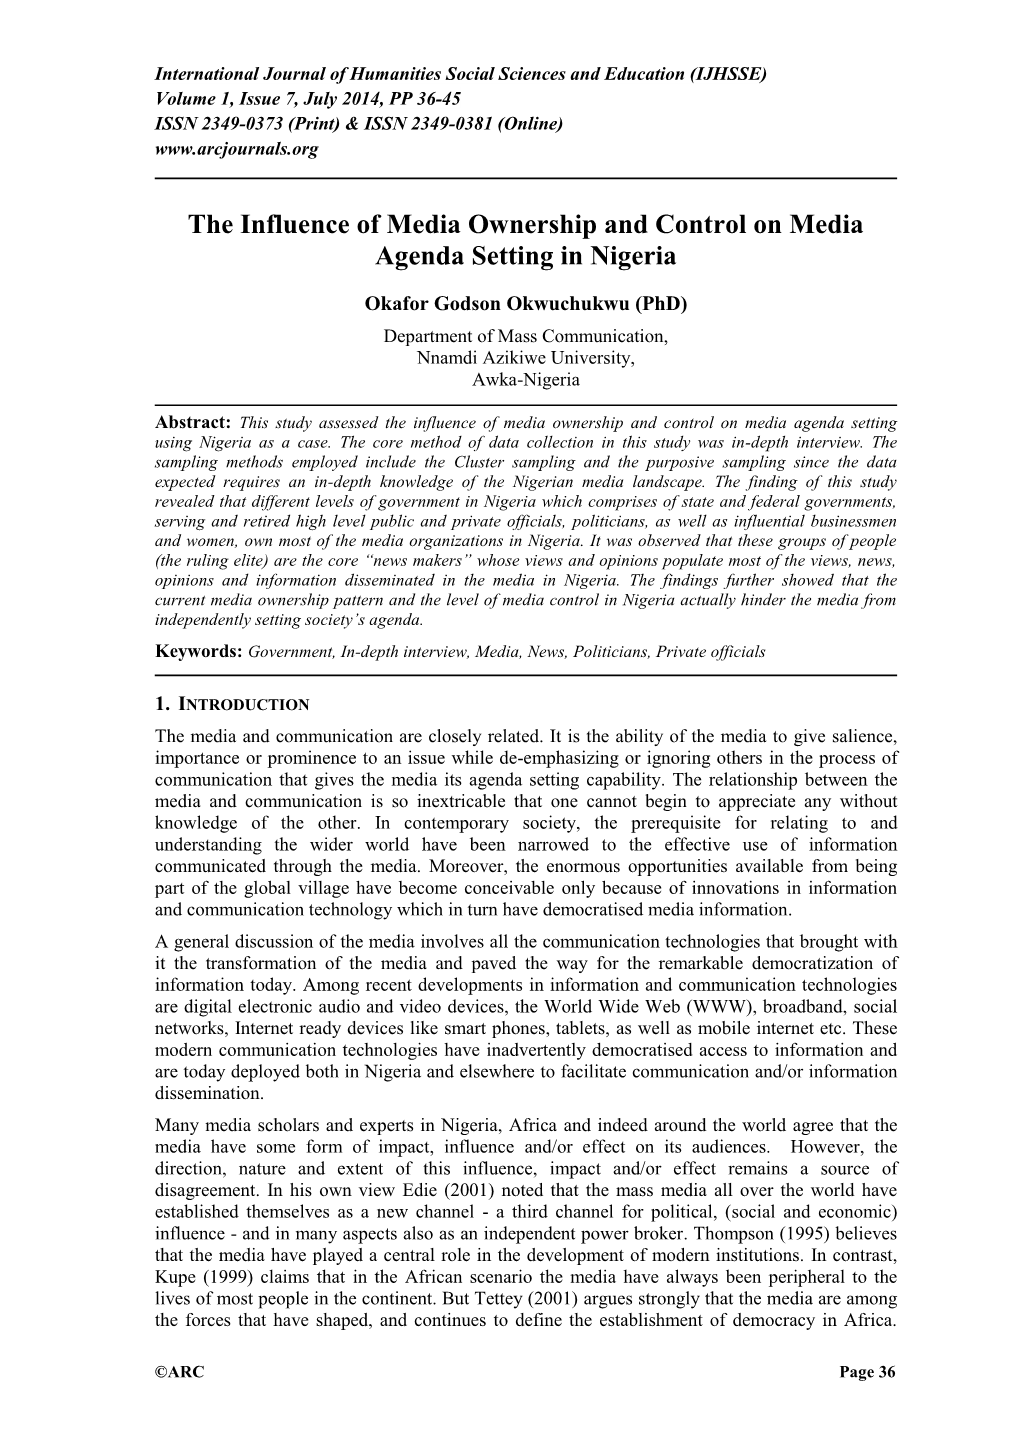 The Influence of Media Ownership and Control on Media Agenda Setting in Nigeria